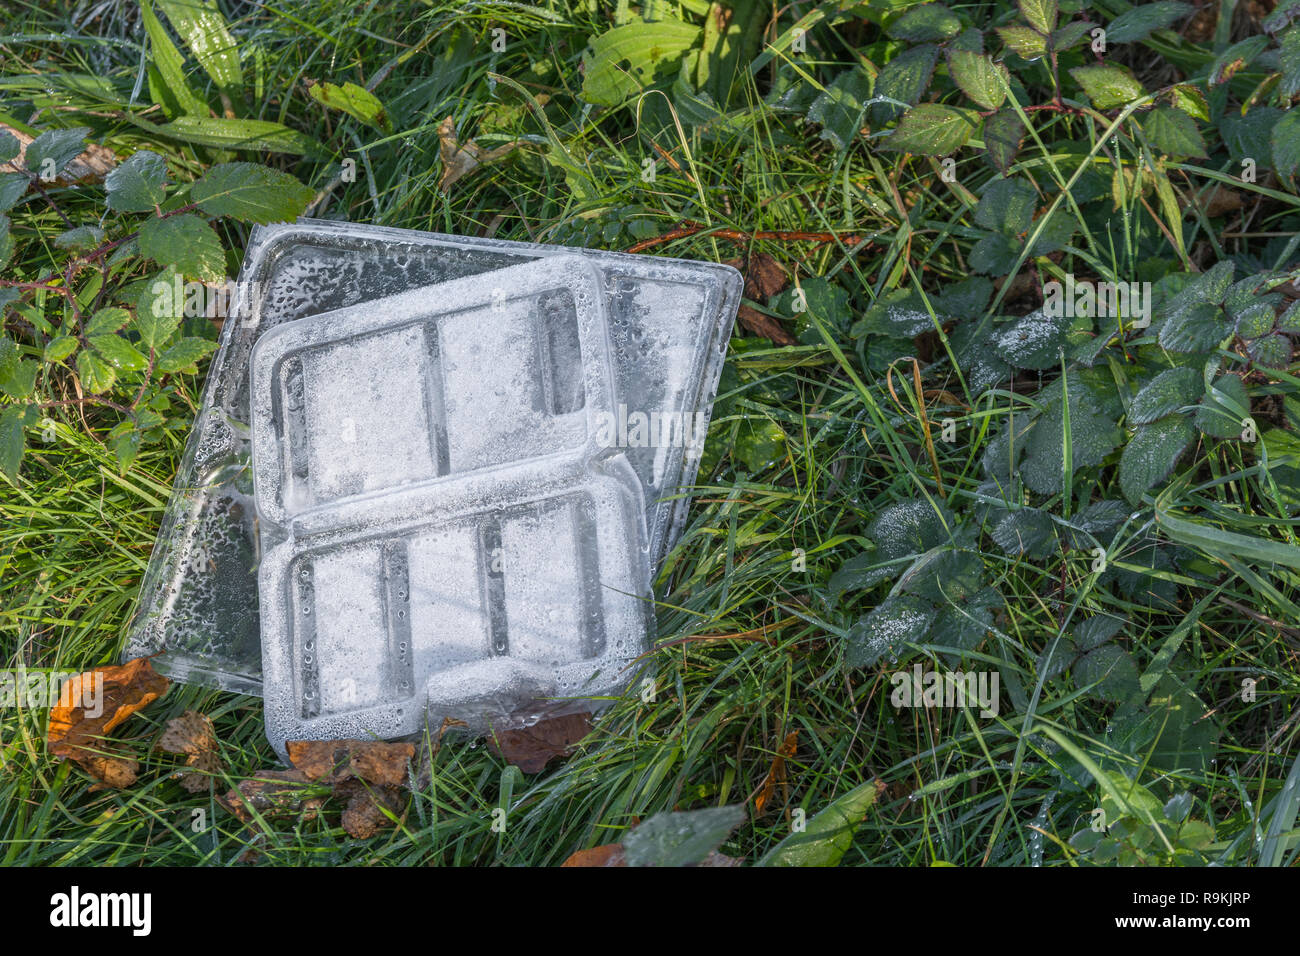 PTFR plastic food wrapper discarded in rural hedgerow. Metaphor plastic pollution, environmental pollution, war on plastic waste, plastic rubbish. Stock Photo